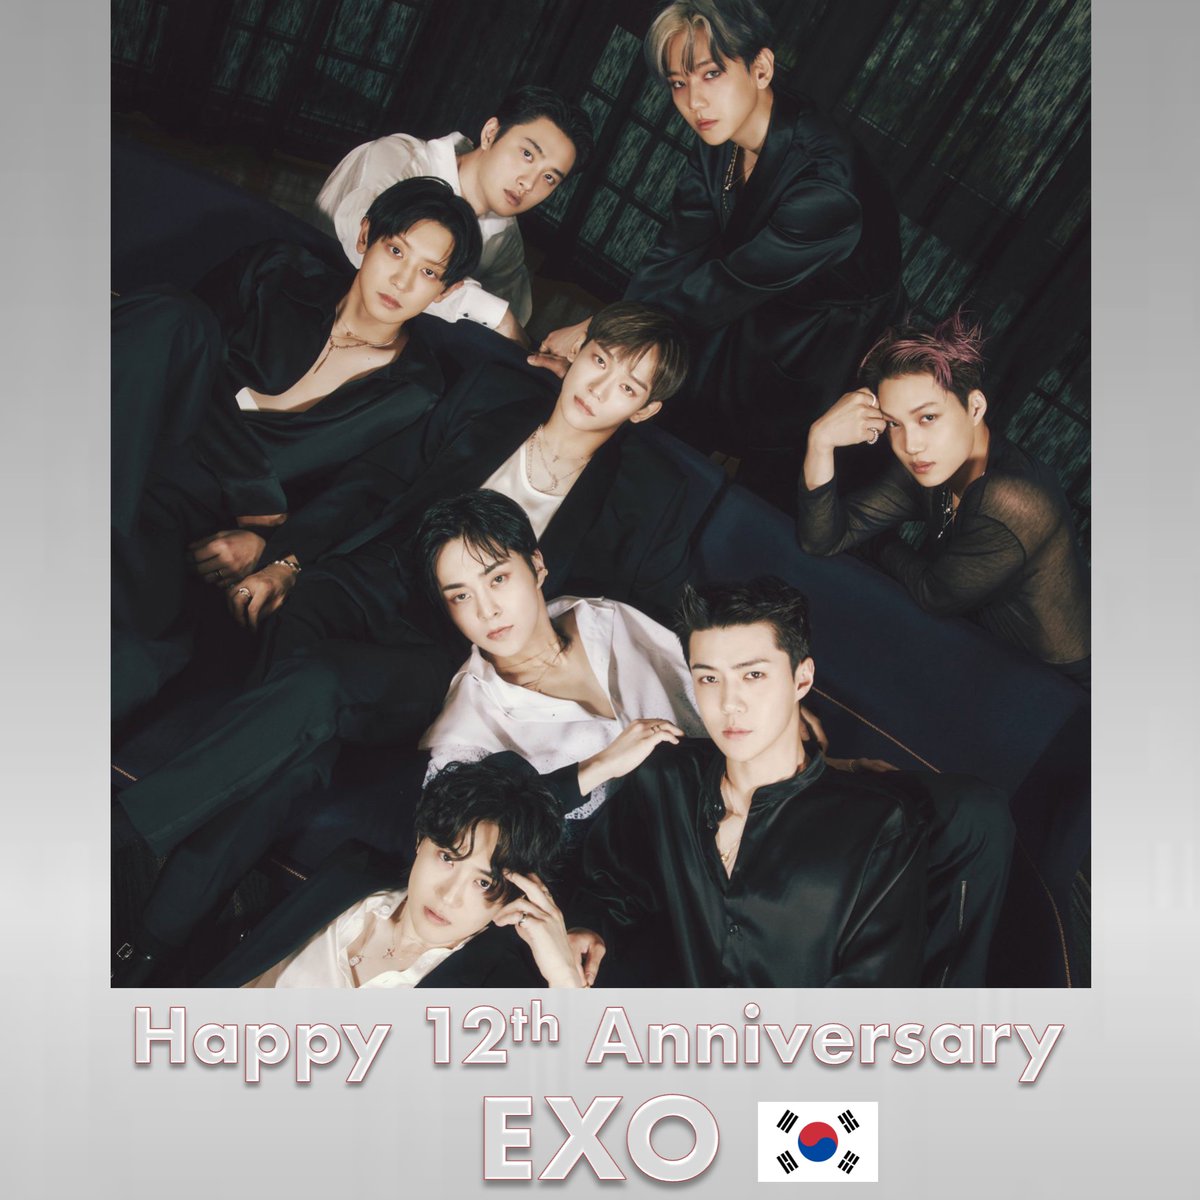 Happy 12th anniversary to the chart-topping, record-breaking, history-making, top-selling legendary Band #EXO, who paved the way for many! 👏🎂🎉🌟🐐👑👑👑👑👑👑👑👑👑💙 Exo were a huge success from day 1 with their first studio album XOXO (2013) selling over 1 million copies